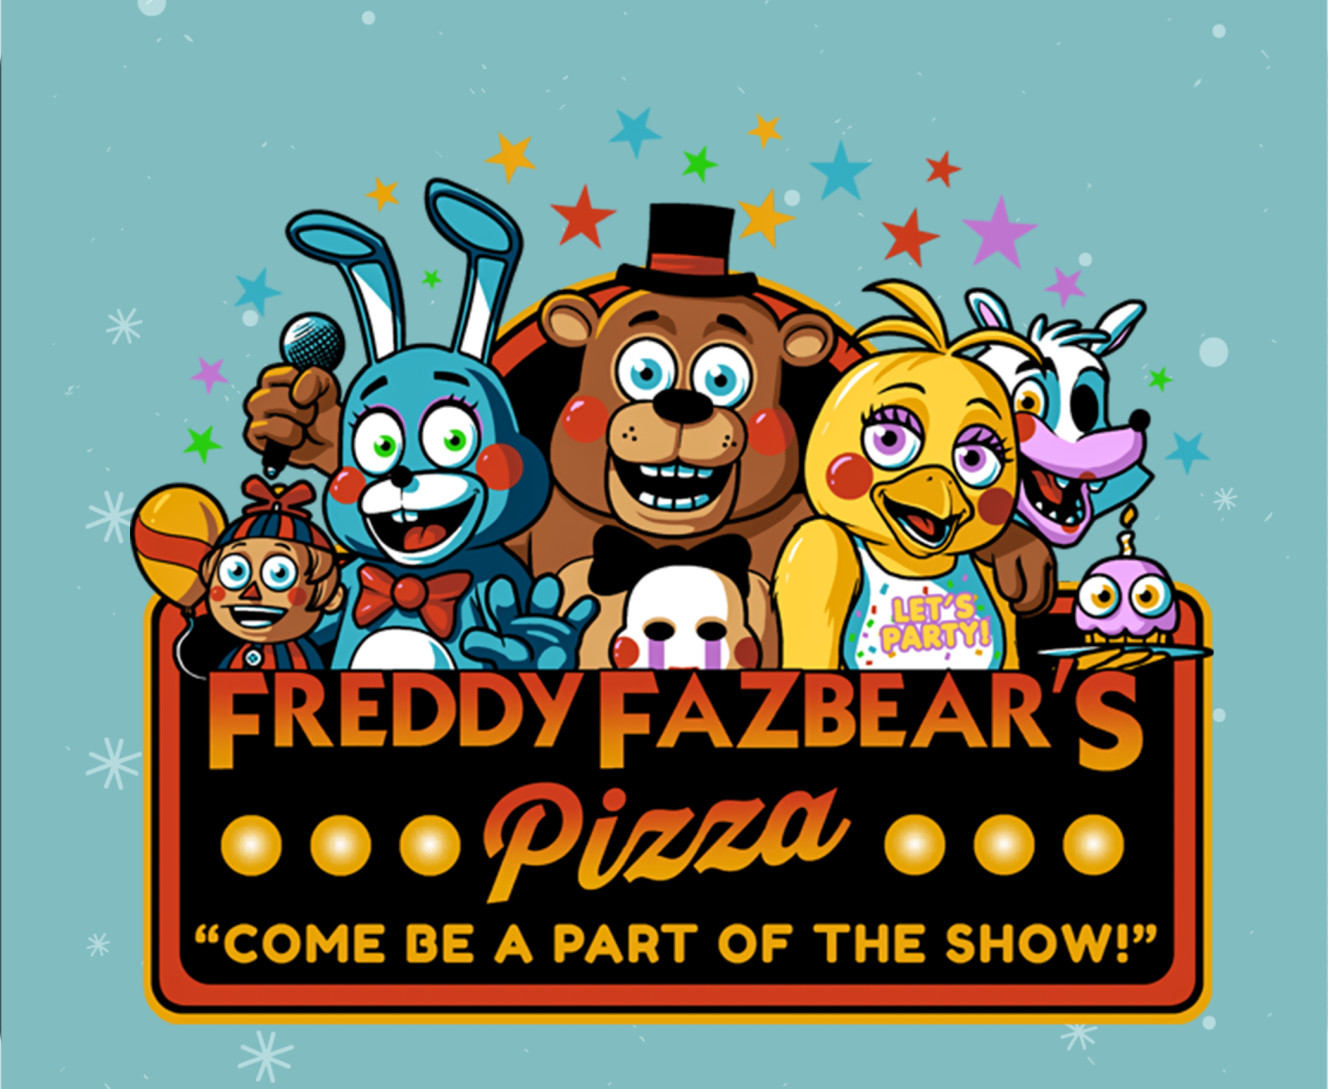 Five Nights At Freddy's 2